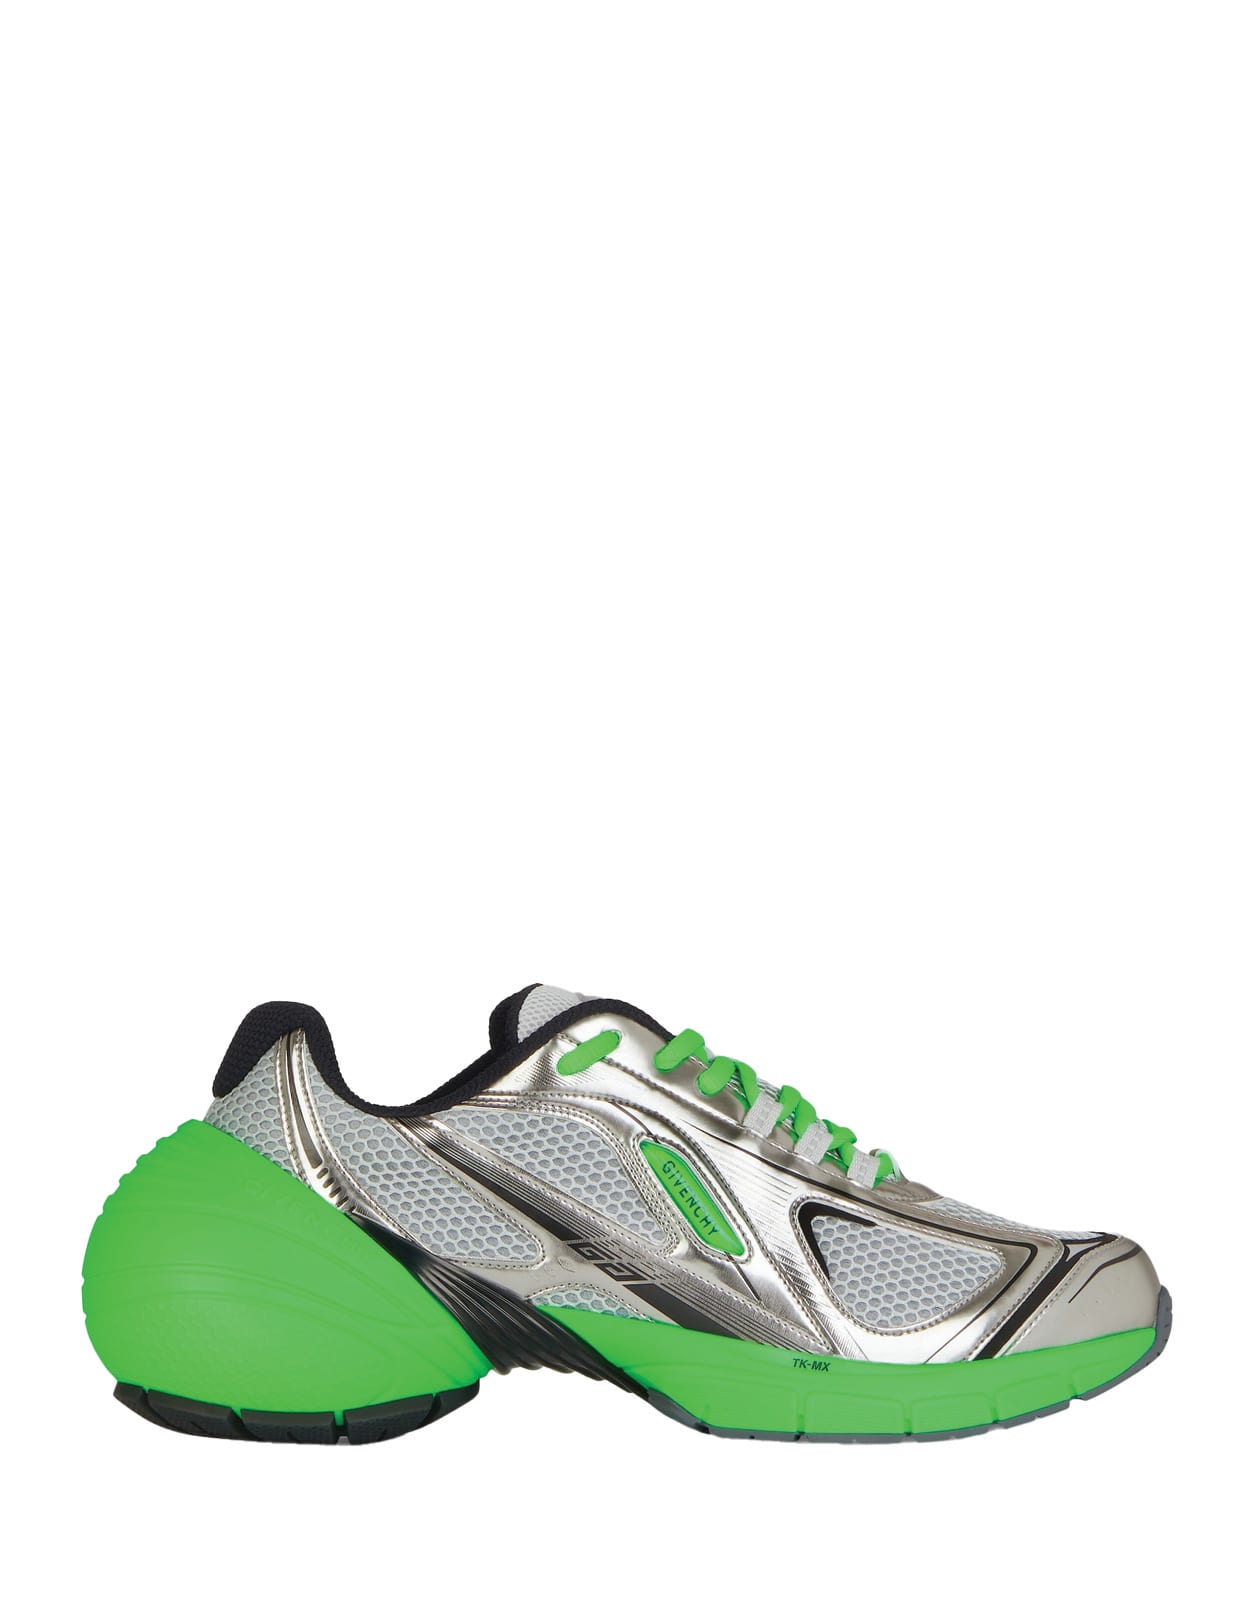 Givenchy Green And Silver Tk-mx Runner Sneakers